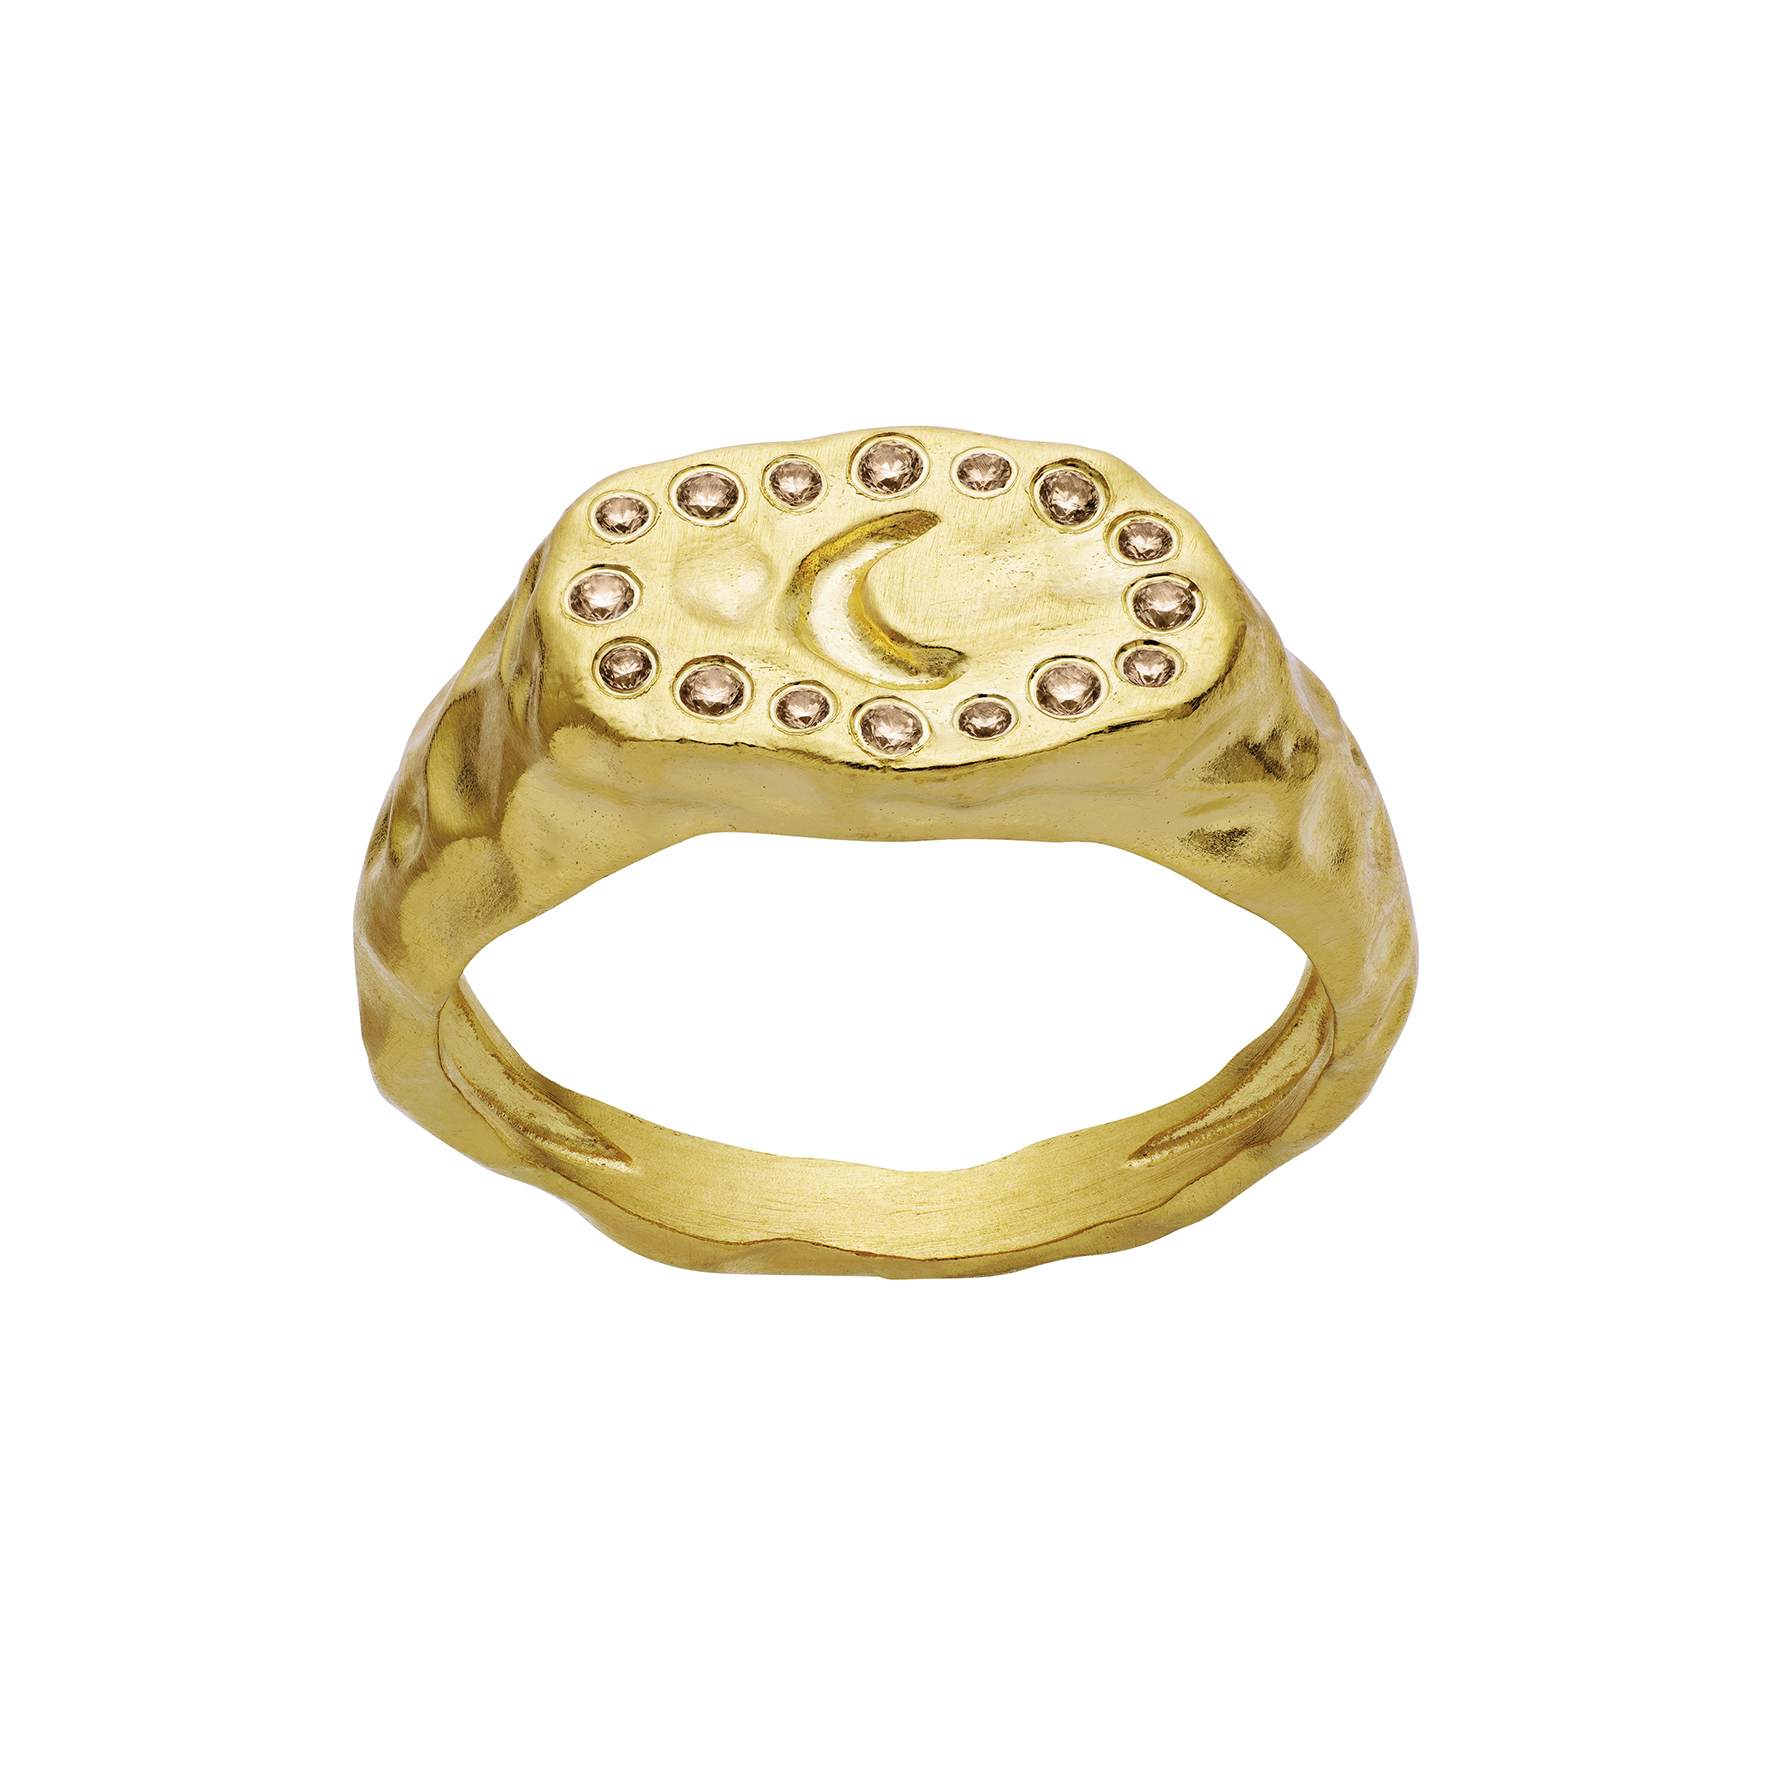 Demi Ring from Maanesten in Goldplated-Silver Sterling 925